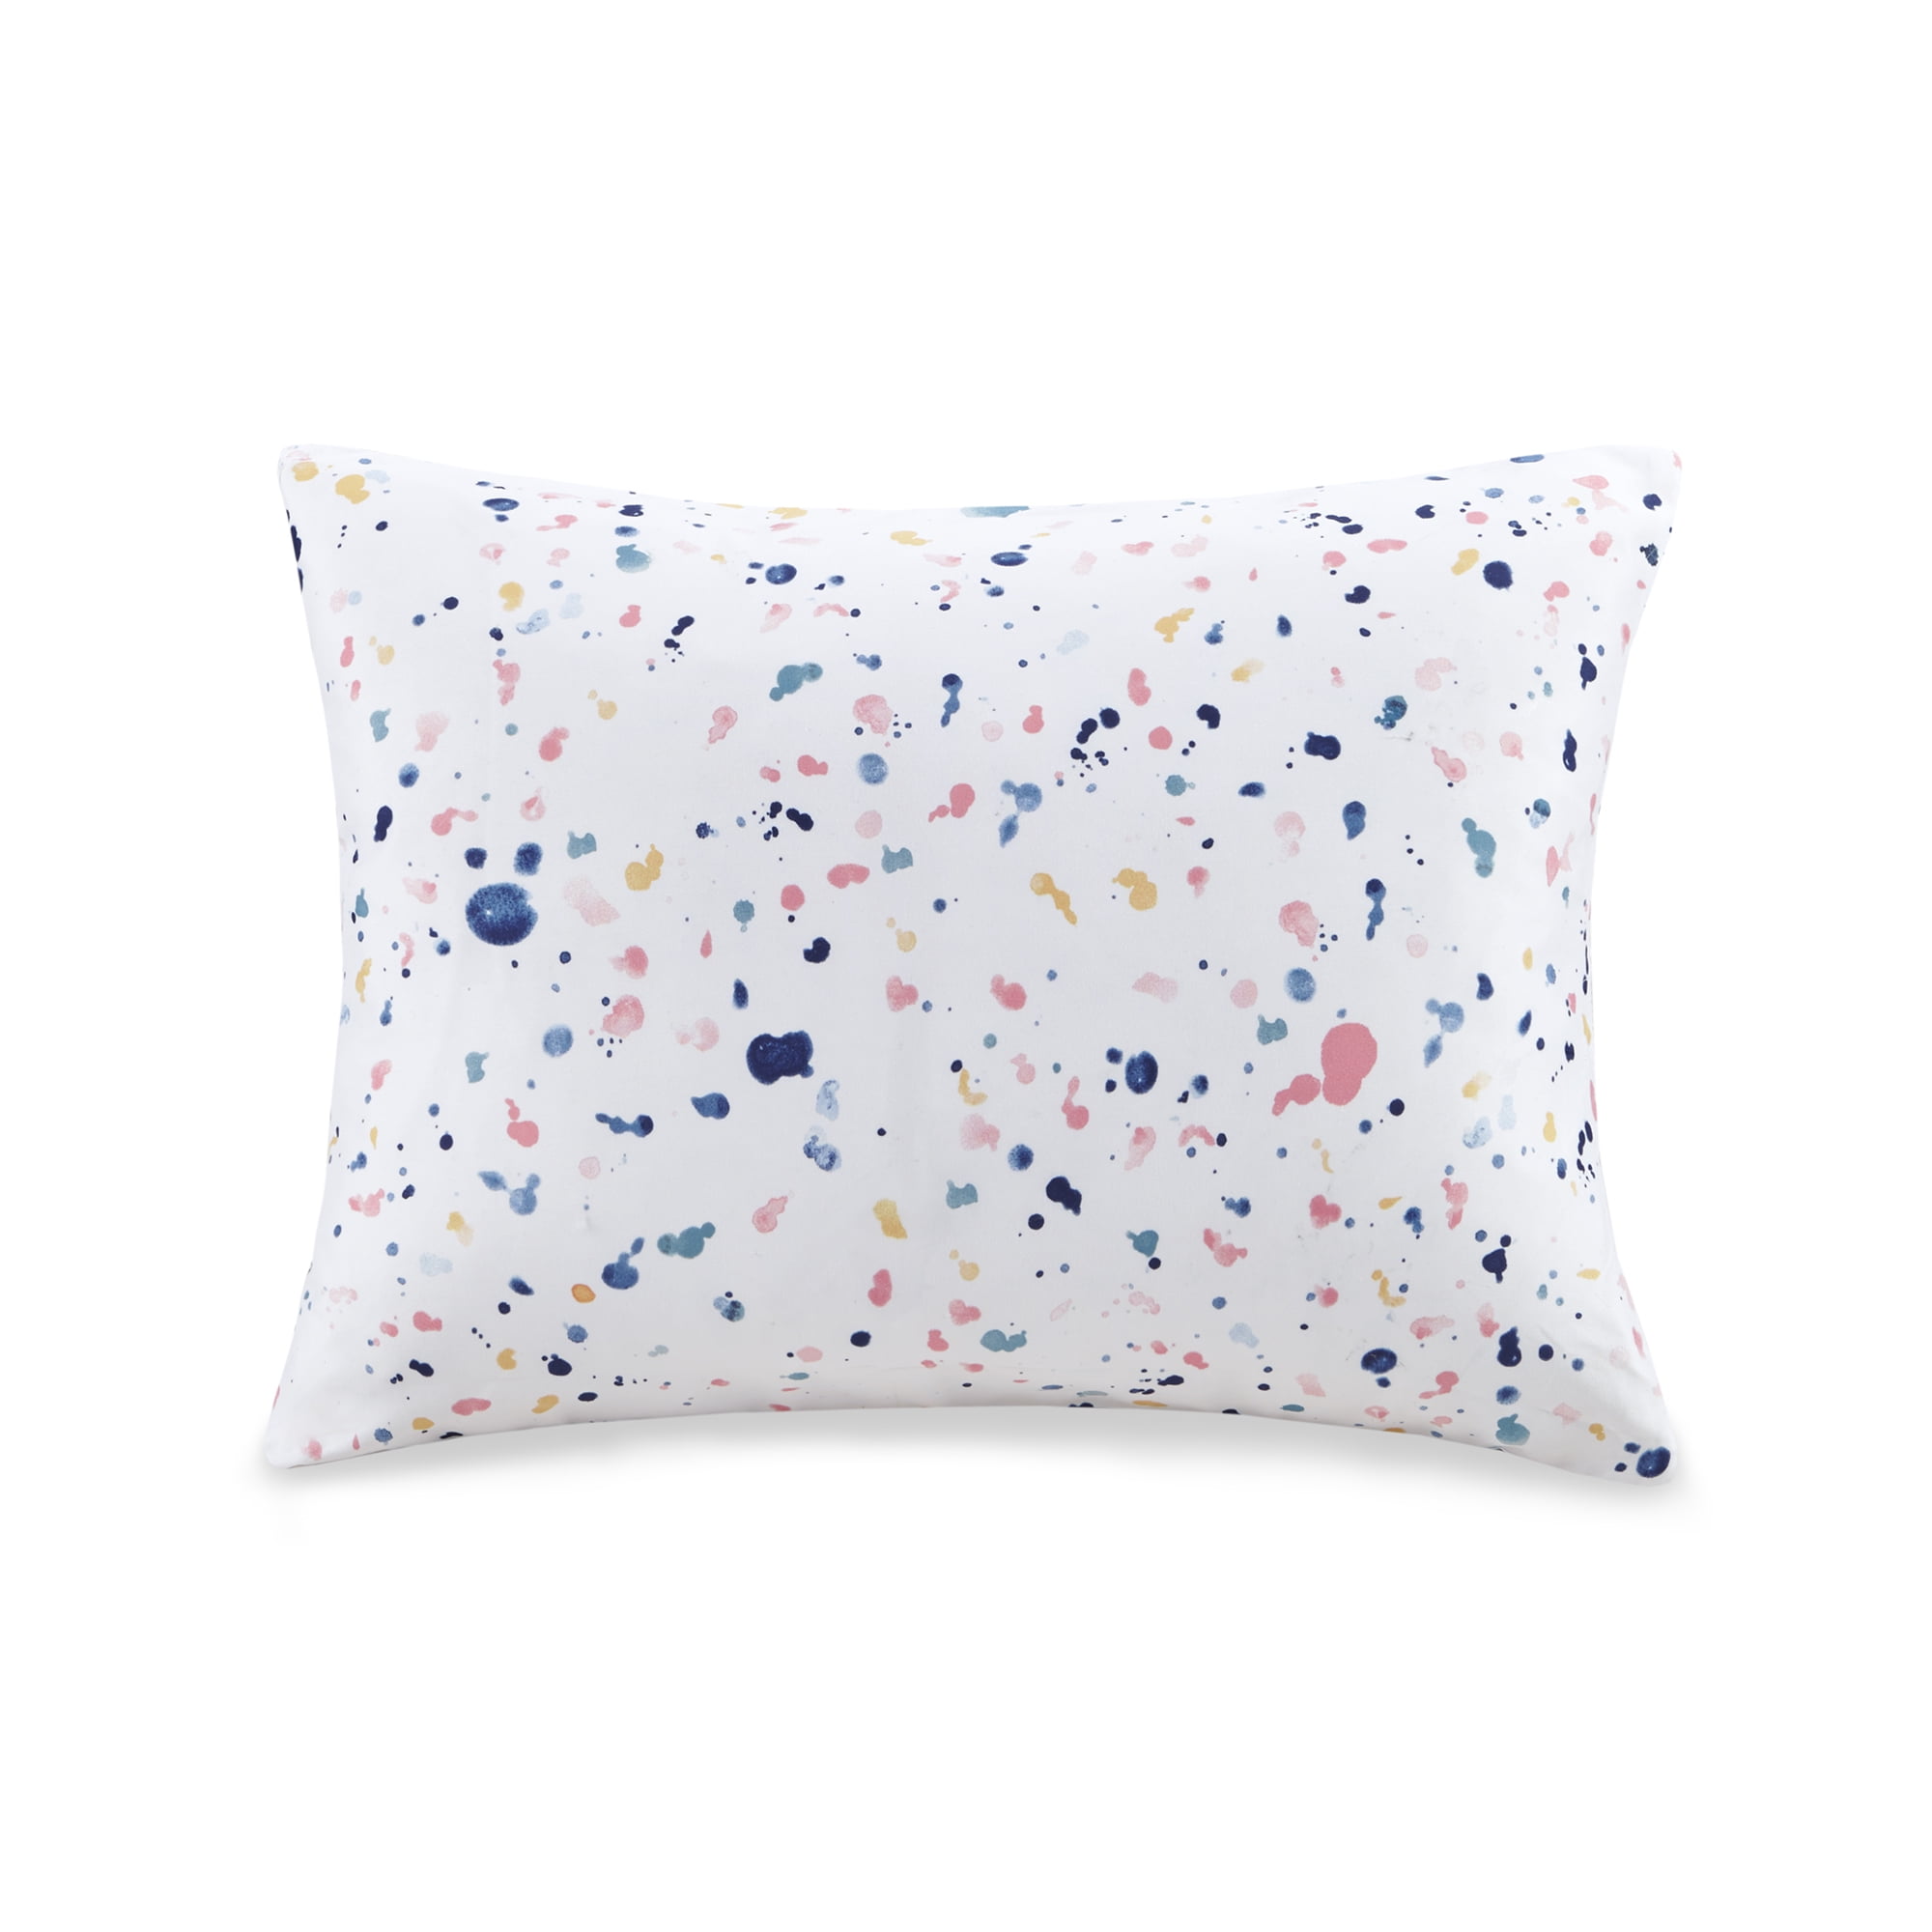 Mainstays Woven Microfiber Printed Dots Travel Pillow Cover, Zipper Closure, 15"x20", White